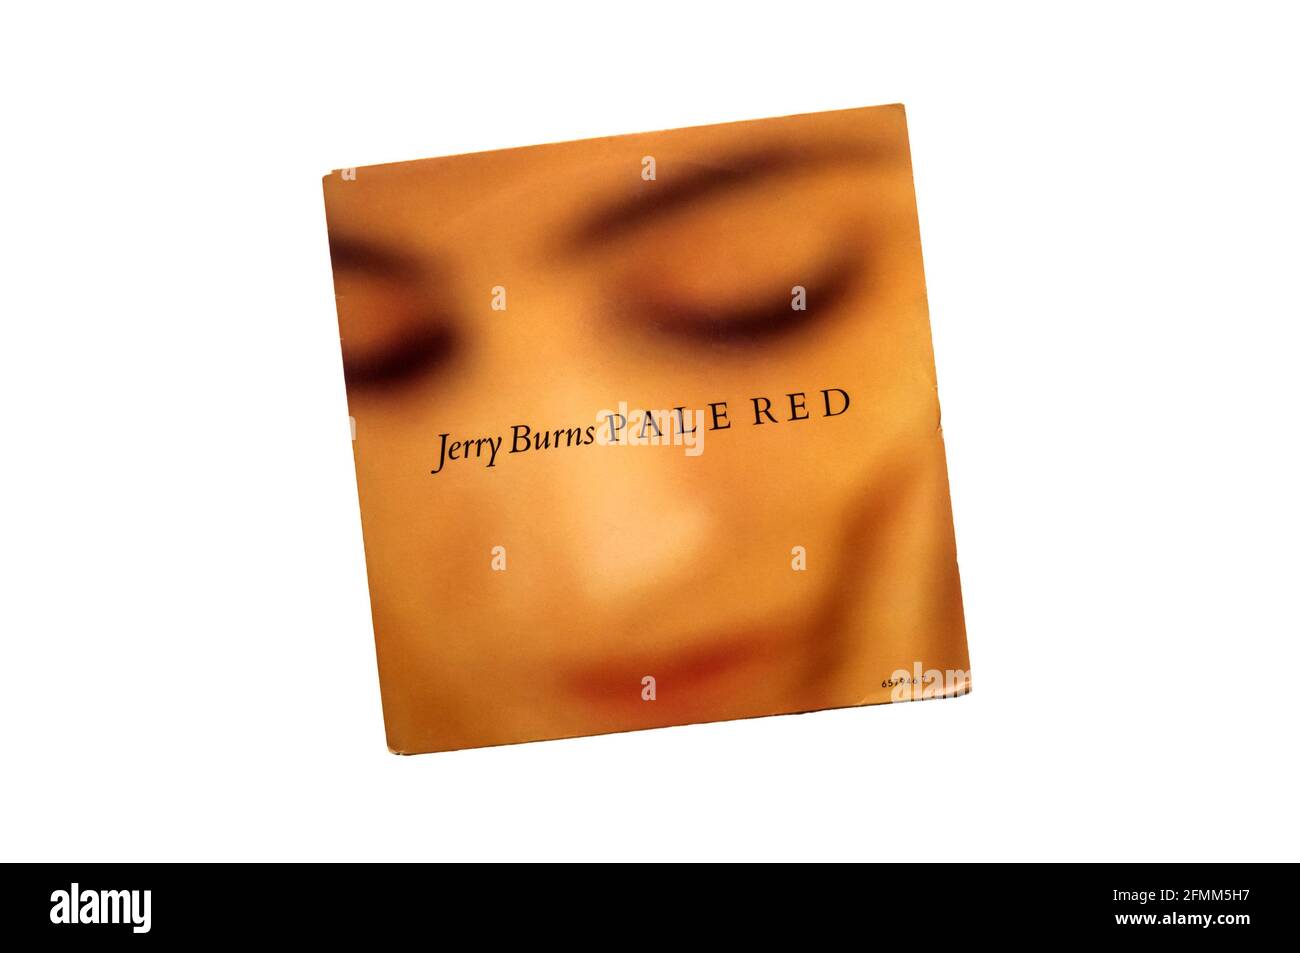 1992 7' single, Pale Red by Scottish singer Jerry Burns. Stock Photo